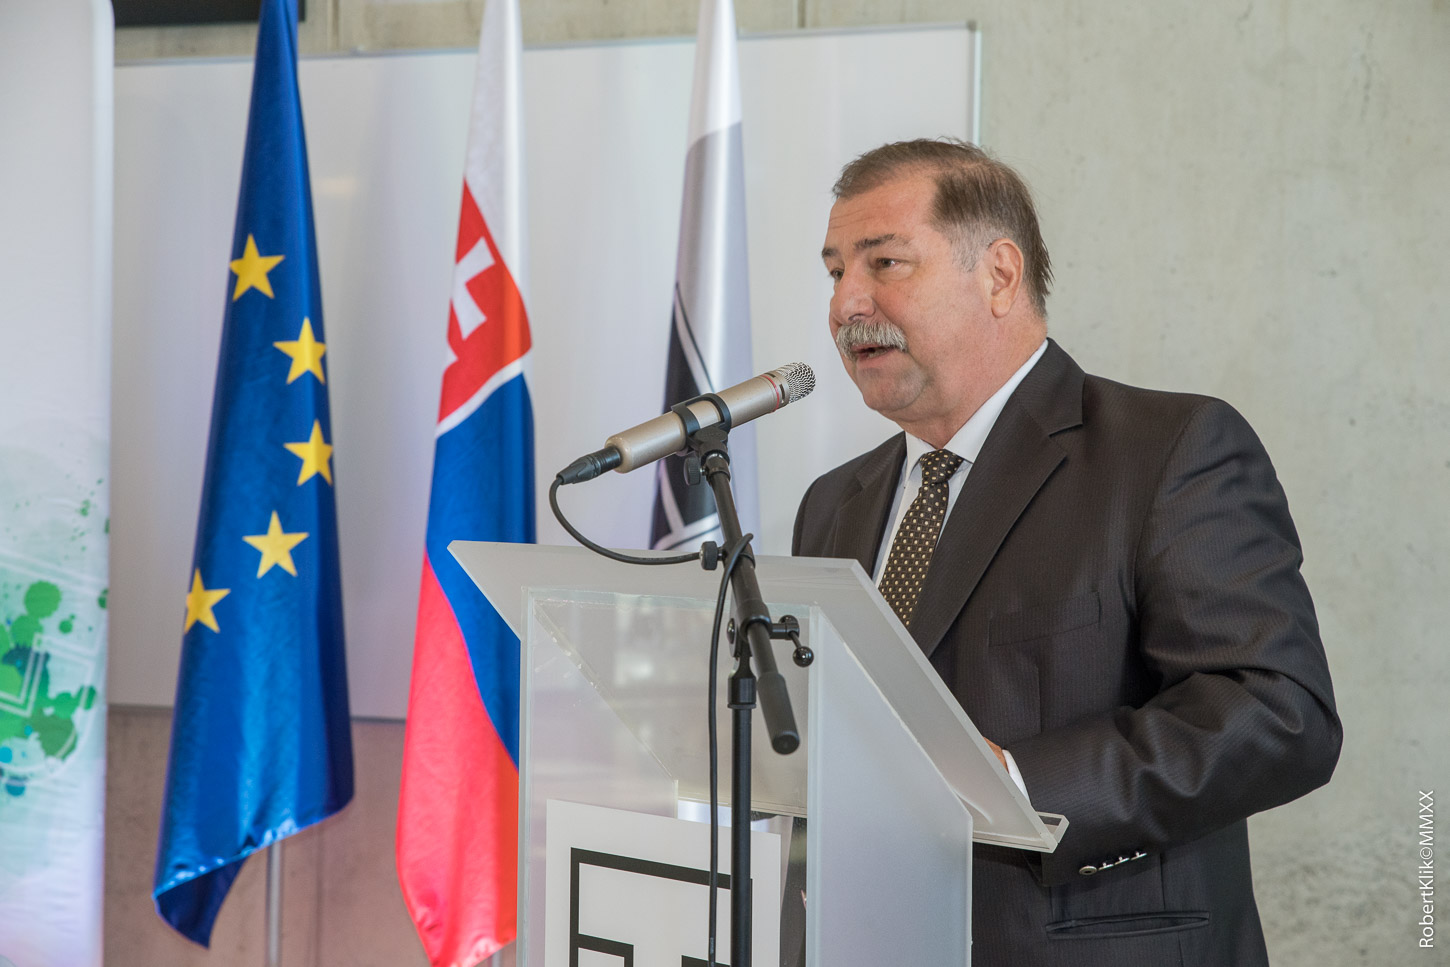 A Hydrogen Technology Research Centre will be established in Košice